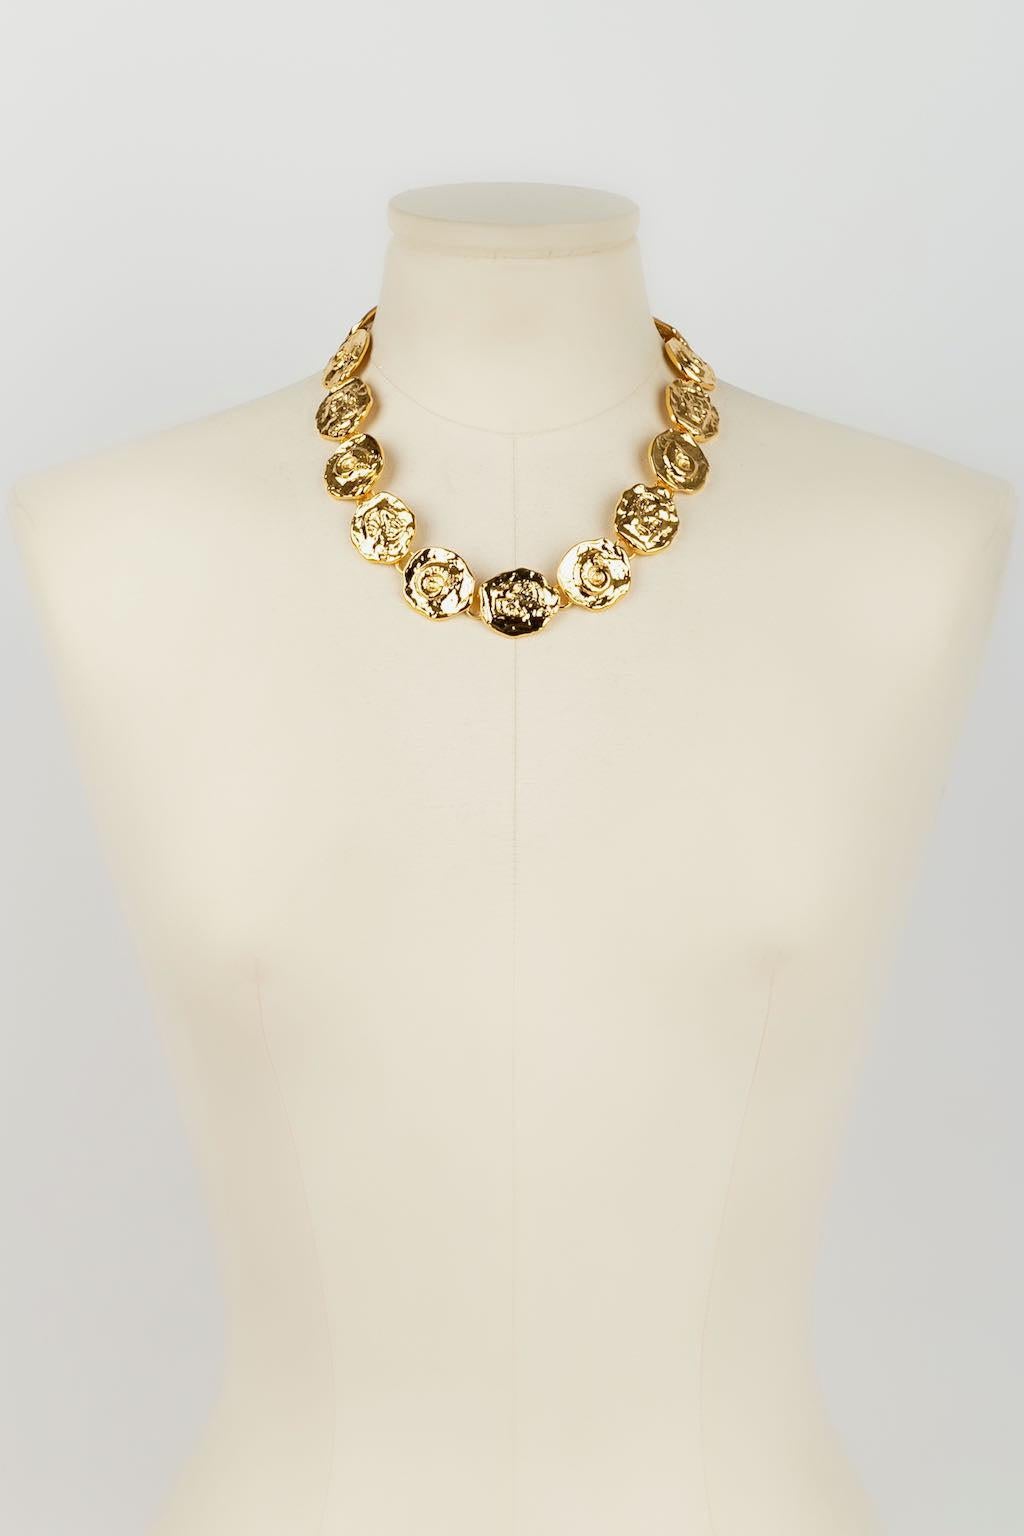 Yves Saint Laurent -(Made in France) Articulated necklace in gold metal.

Additional information: 
Dimensions: Length: from 44 cm to 49 cm - Height: 2.5 cm
Condition: Very good condition
Seller Ref number: BC173